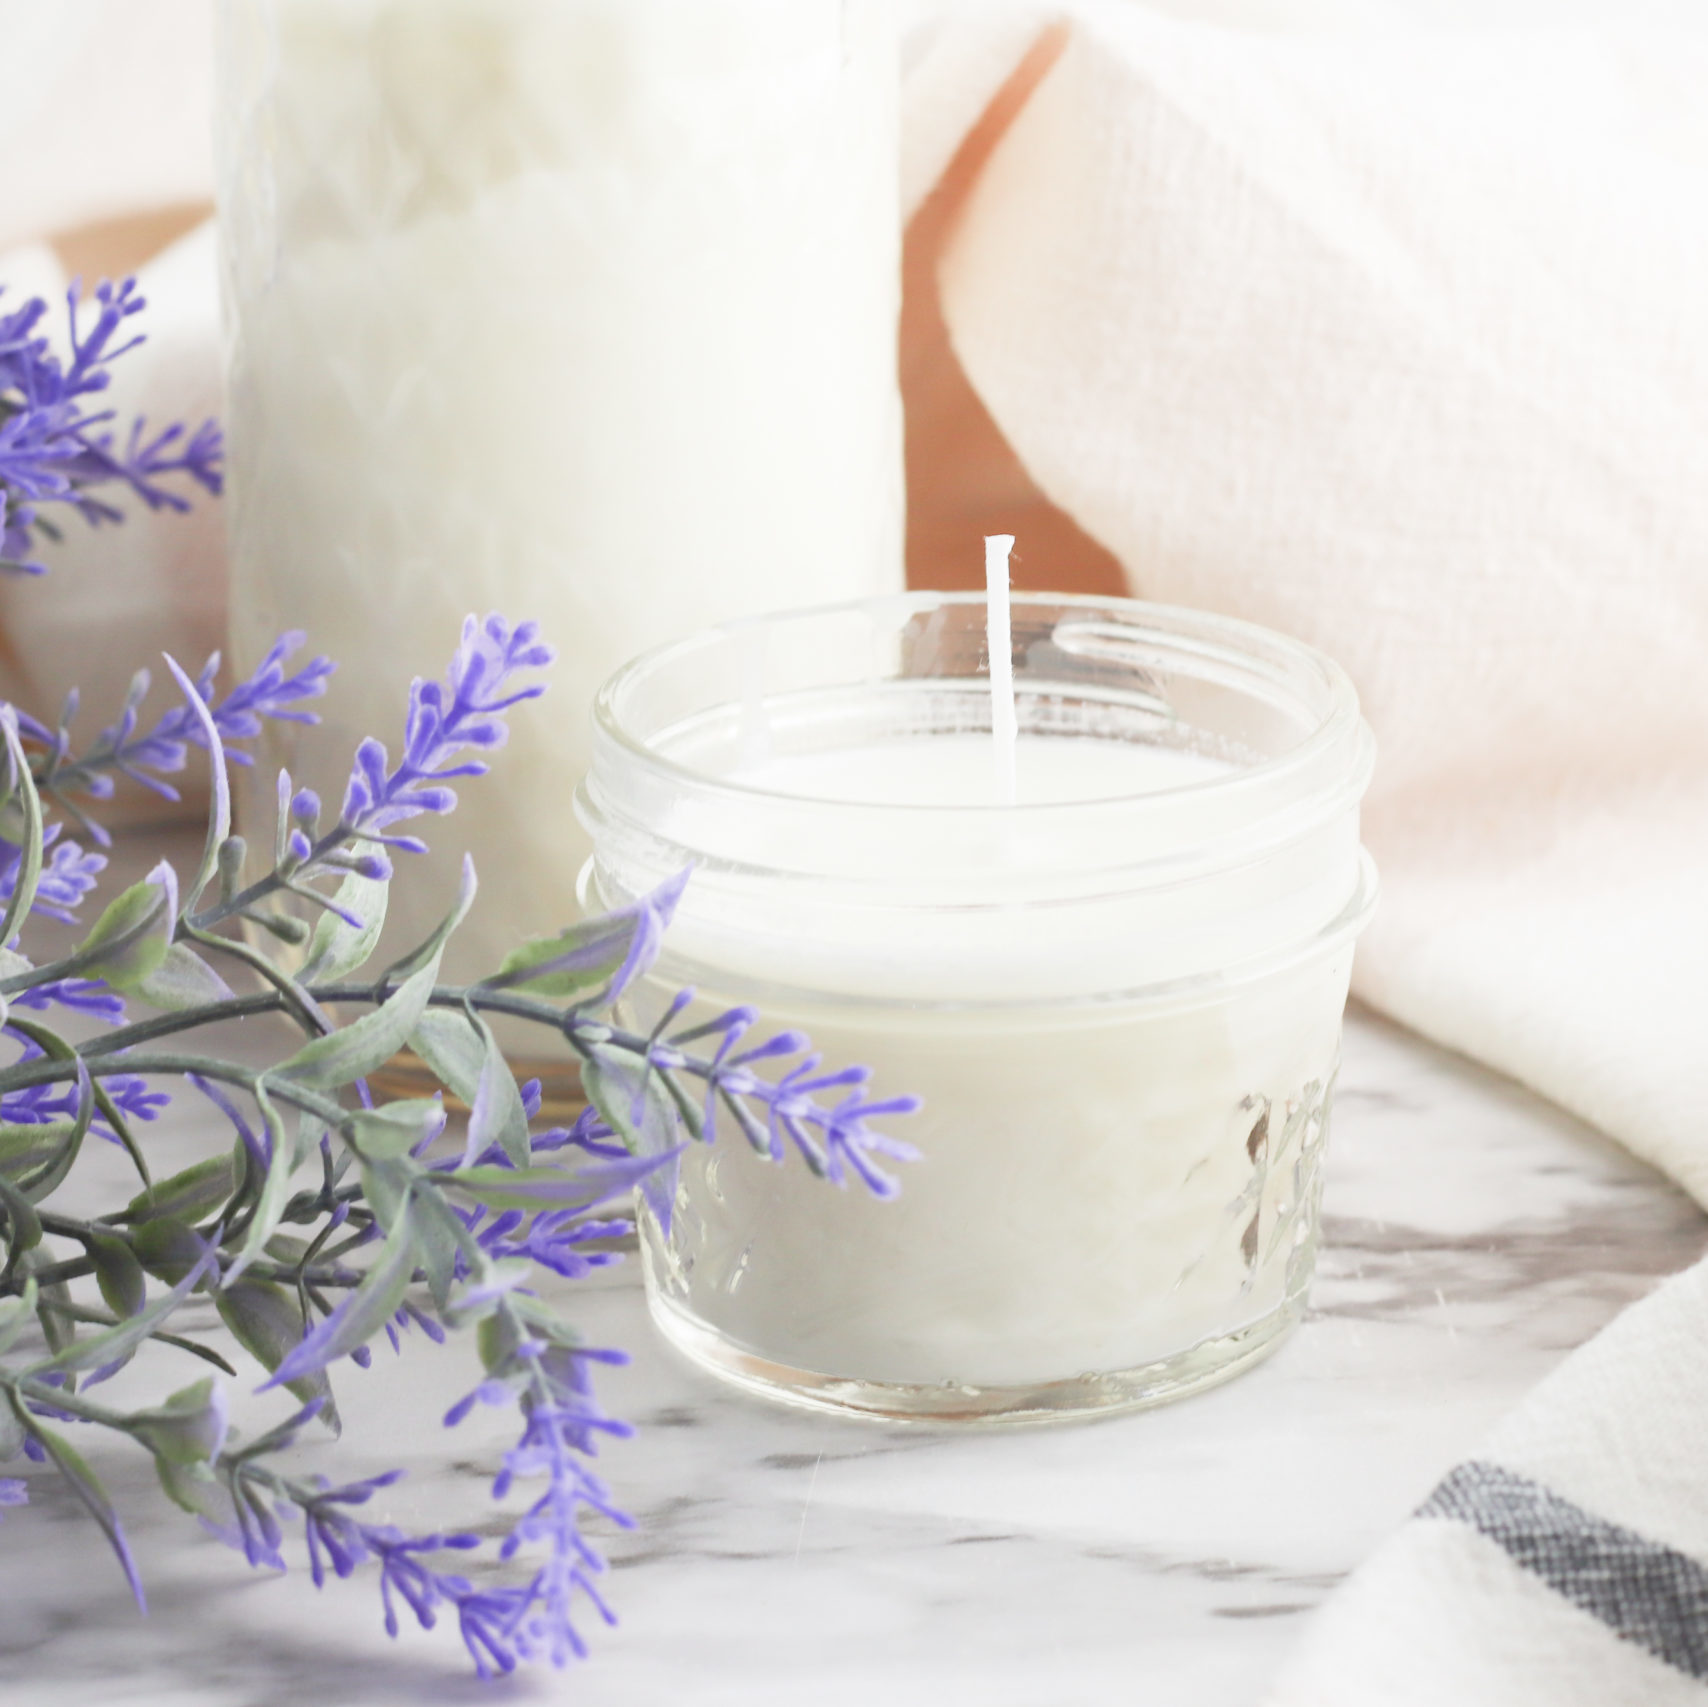 Homemade candles, beautiful, soy wax, flowers, how to make candles